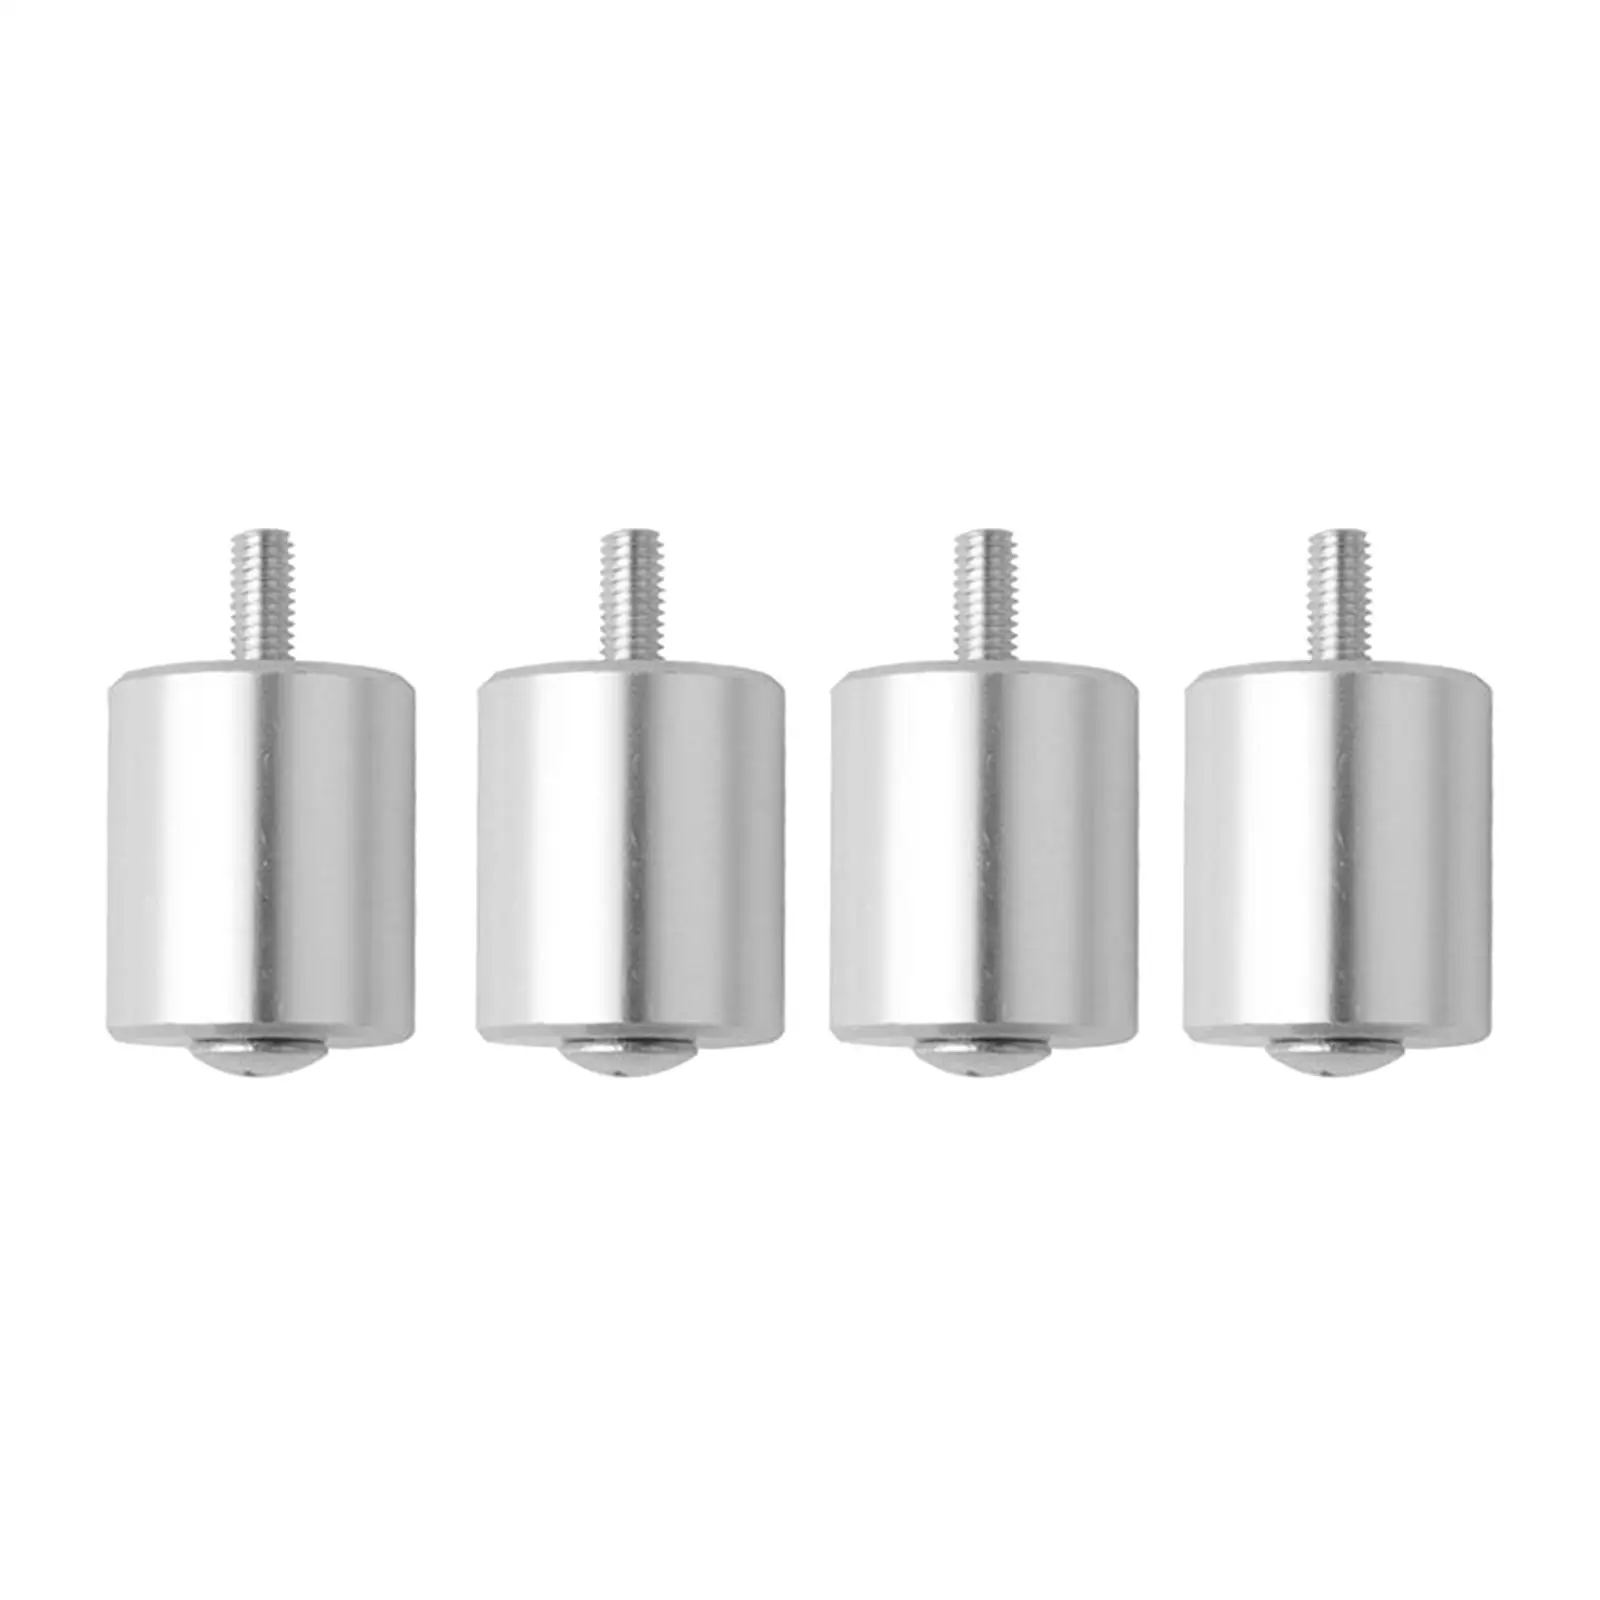 Roof Rack Mounting Fitting Kit with 6Pcs Nuts Accessories for Vehicle